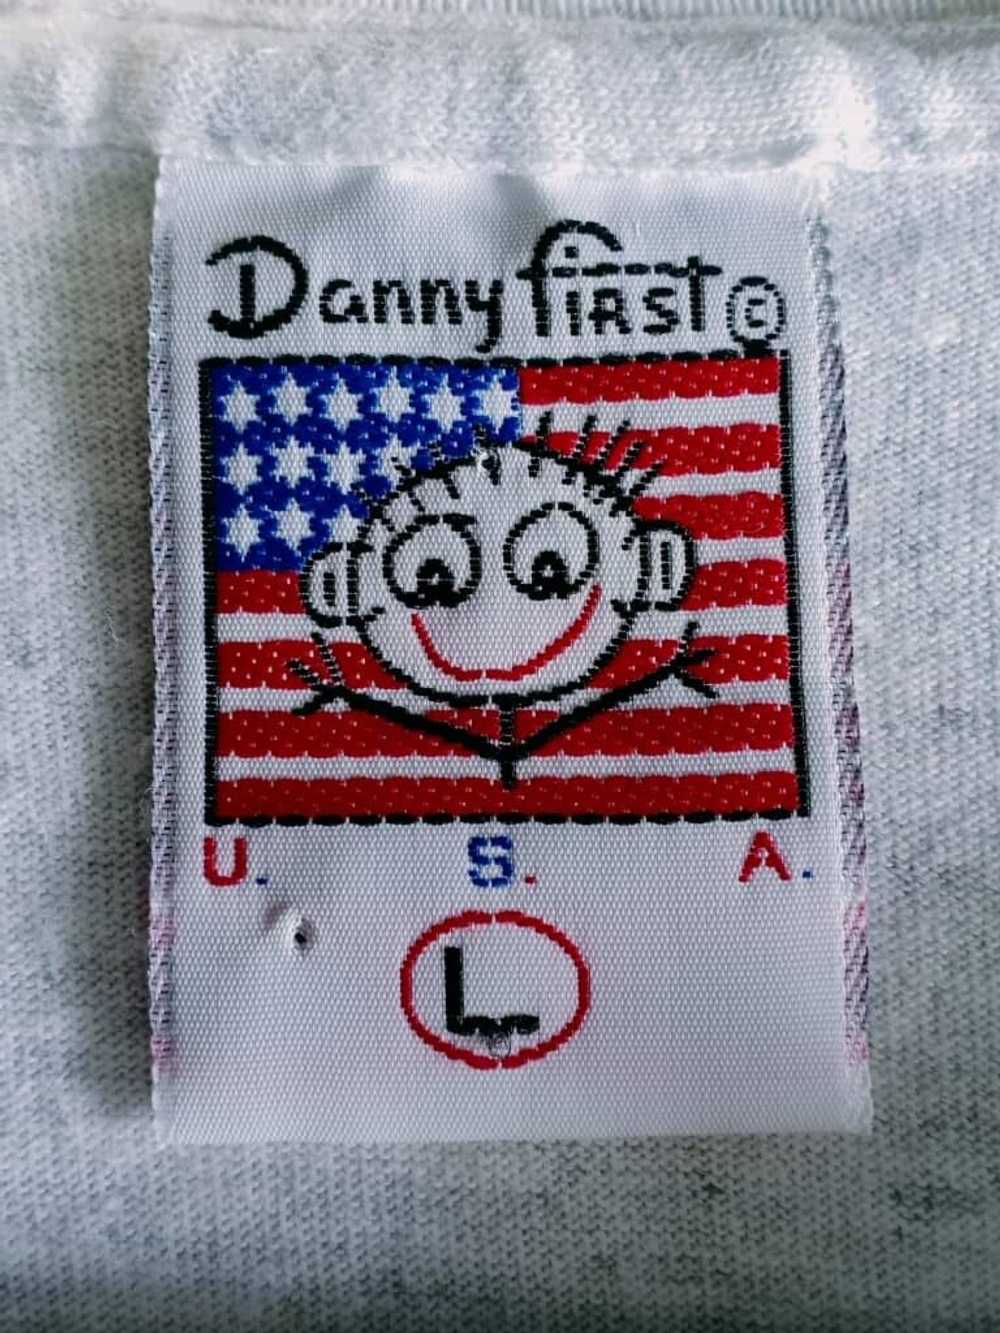 Made In Usa × Vintage Danny First - image 2